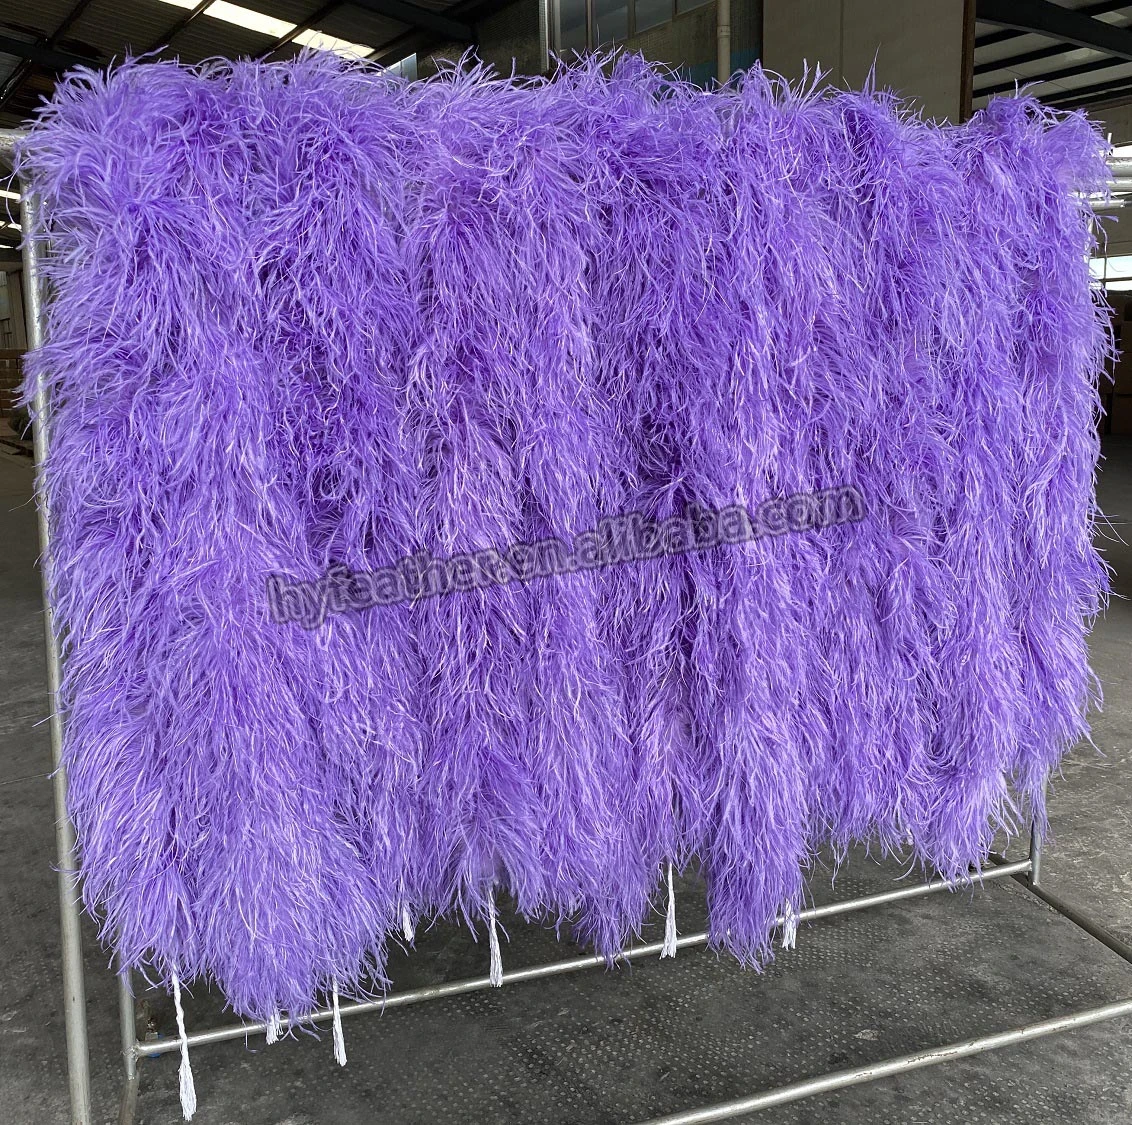 7 China Supplier Wholesale Fashion High cheap feather boa Trade Assurance 10Ply Big Feather boas ostrich